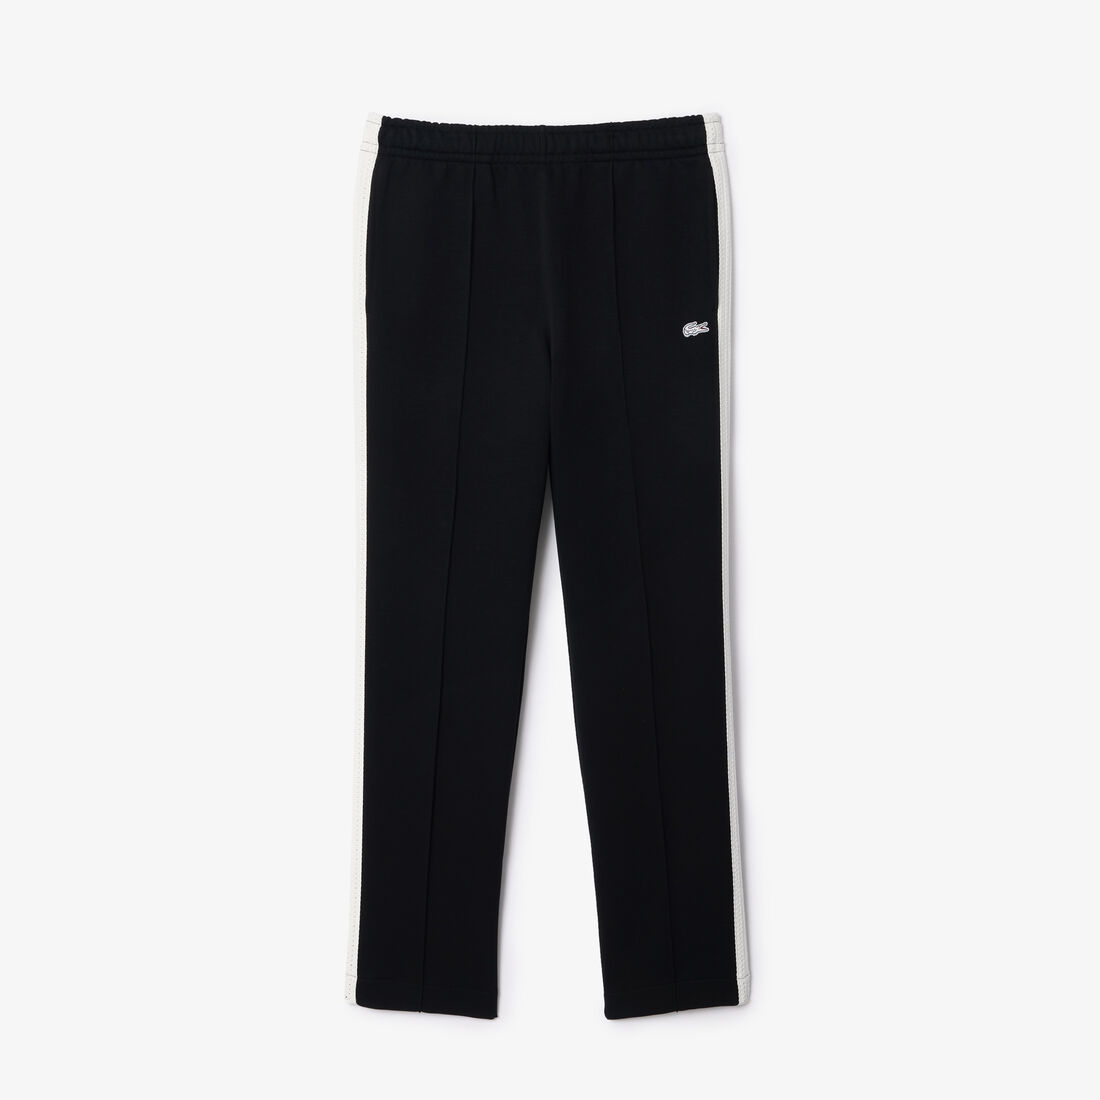 French Made Paris Track Pants - XH7450-00-9M0